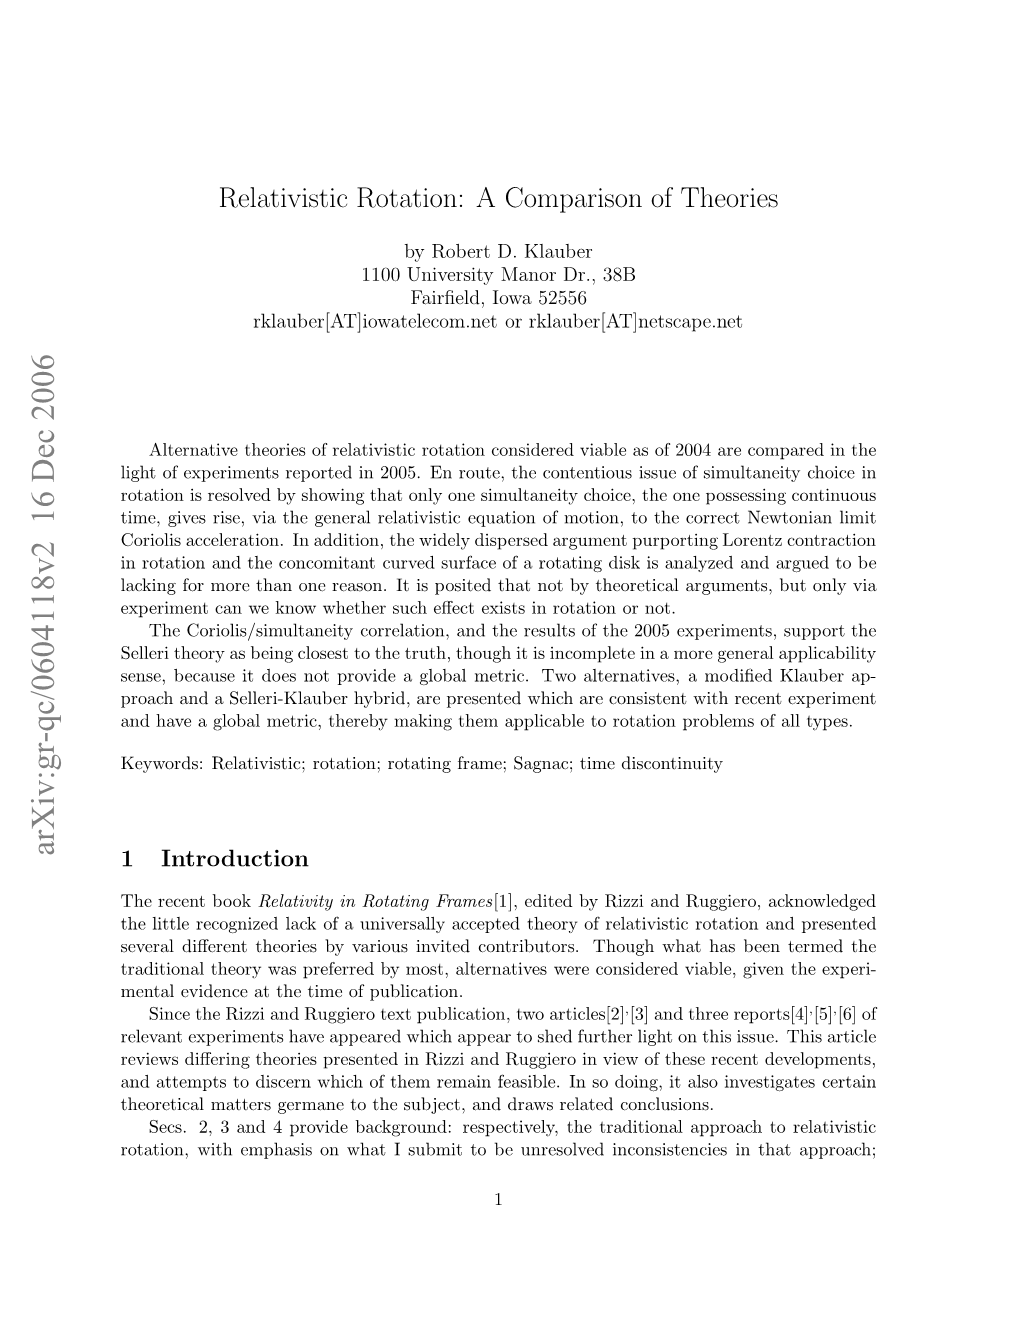 Relativistic Rotation: a Comparison of Theories